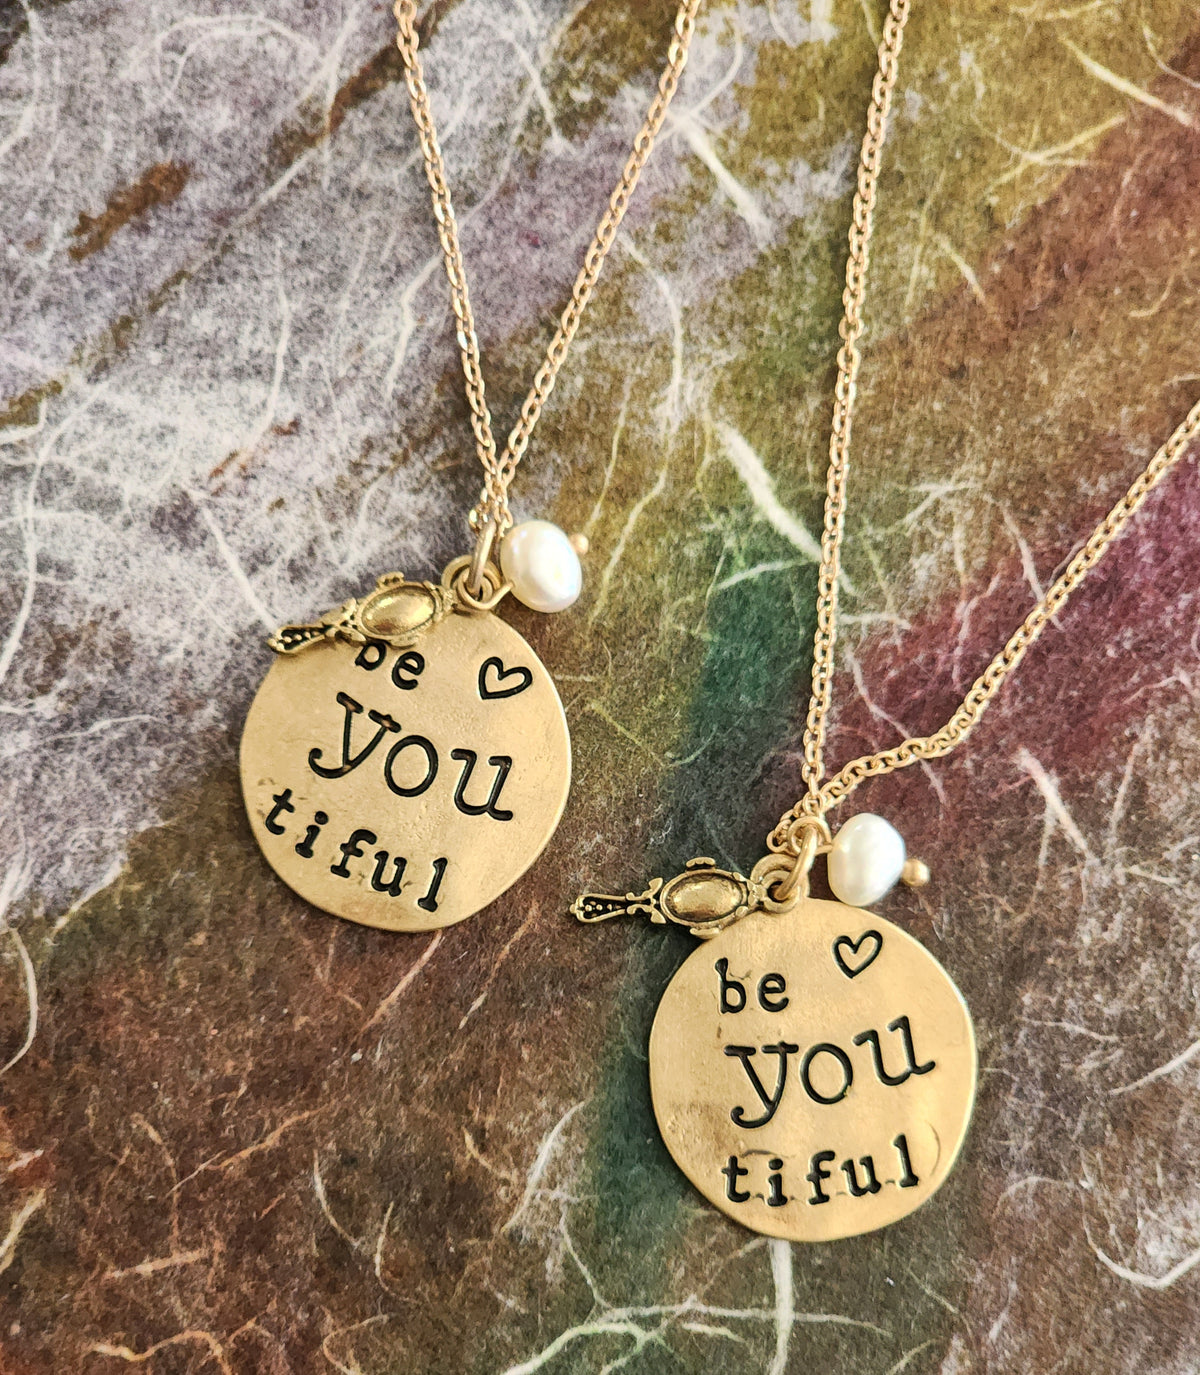 "Be YOU tiful" stamped necklace